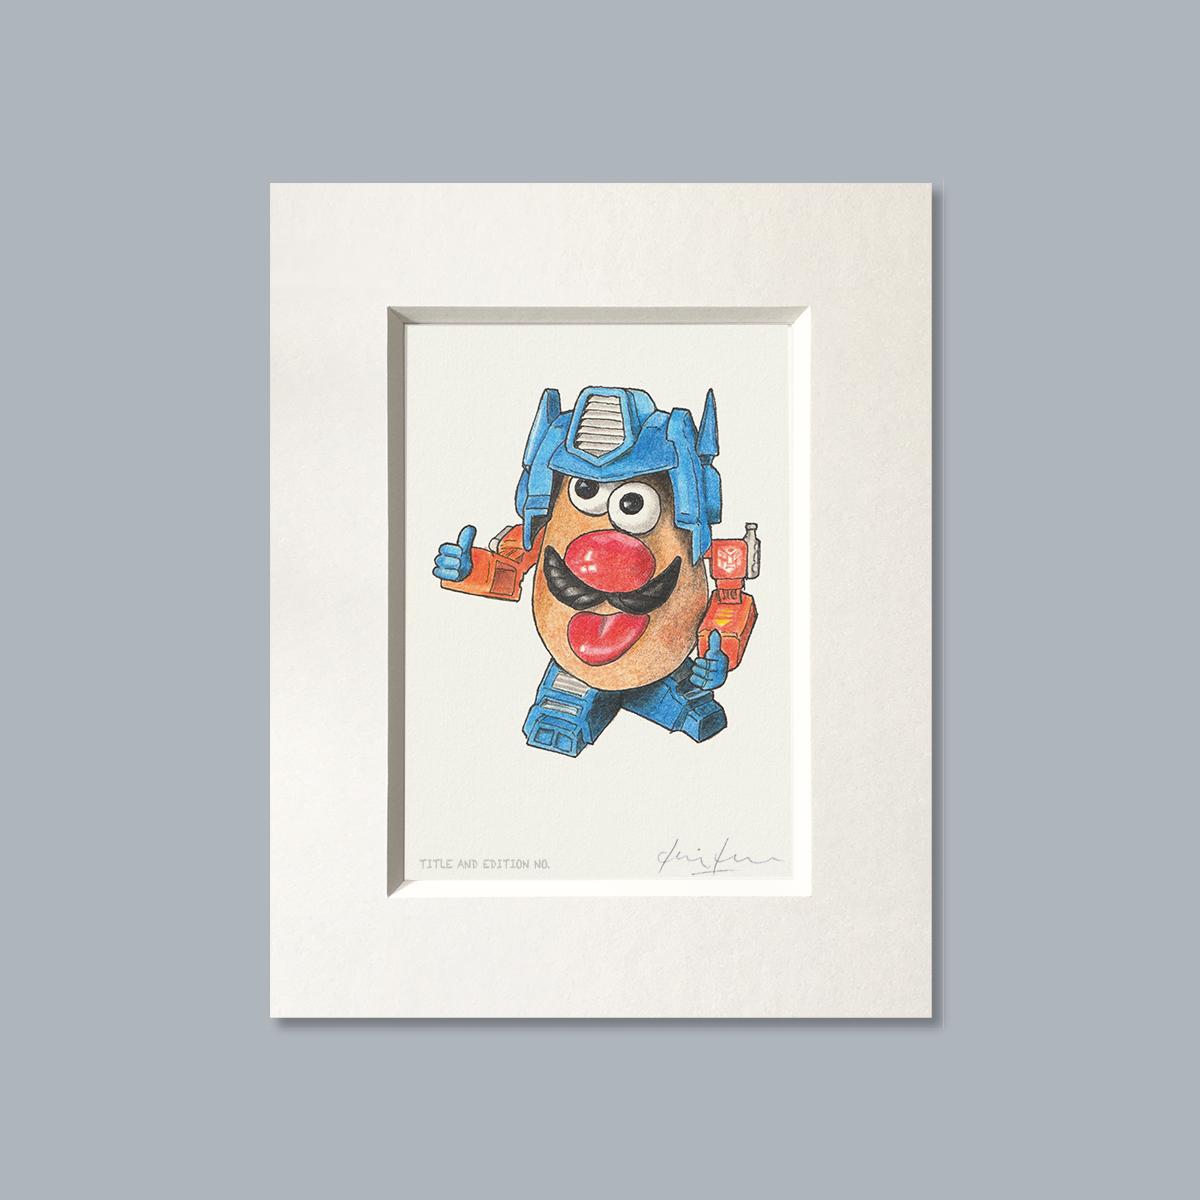 Limited edition print from a pen, ink and coloured pencil drawing of the Mr Potatohead toy dressed as Optimus Prime in a white mount